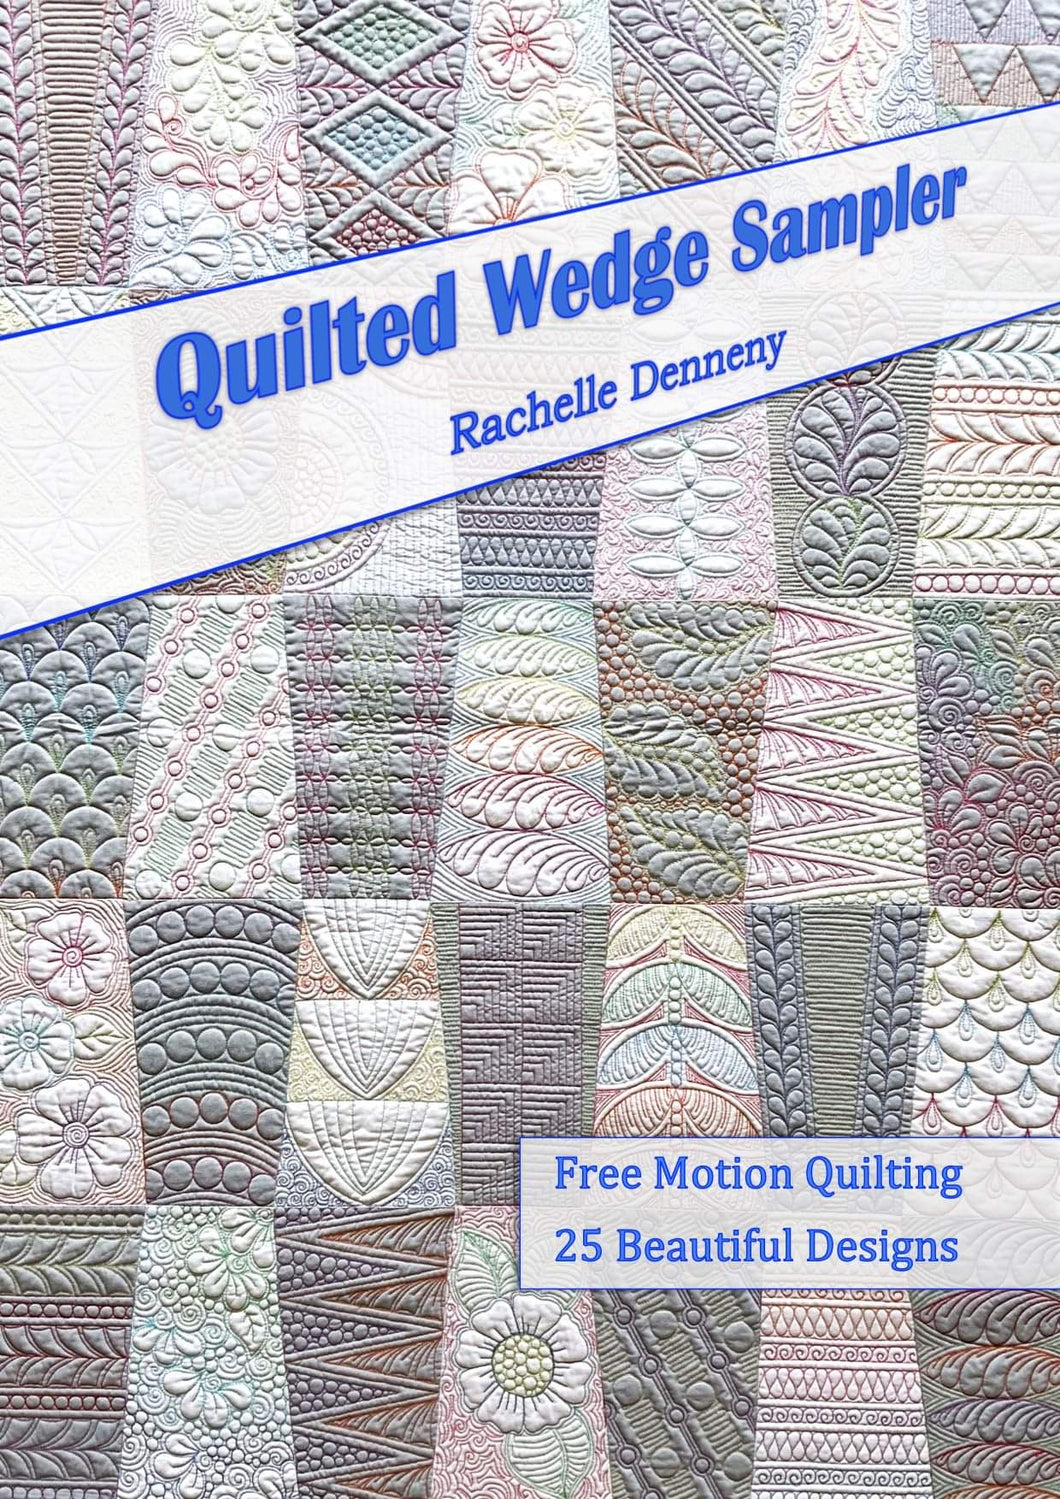 So many ideas on this site and how to do this sampler.  Machine quilting  patterns, Machine quilting designs, Free motion quilt designs